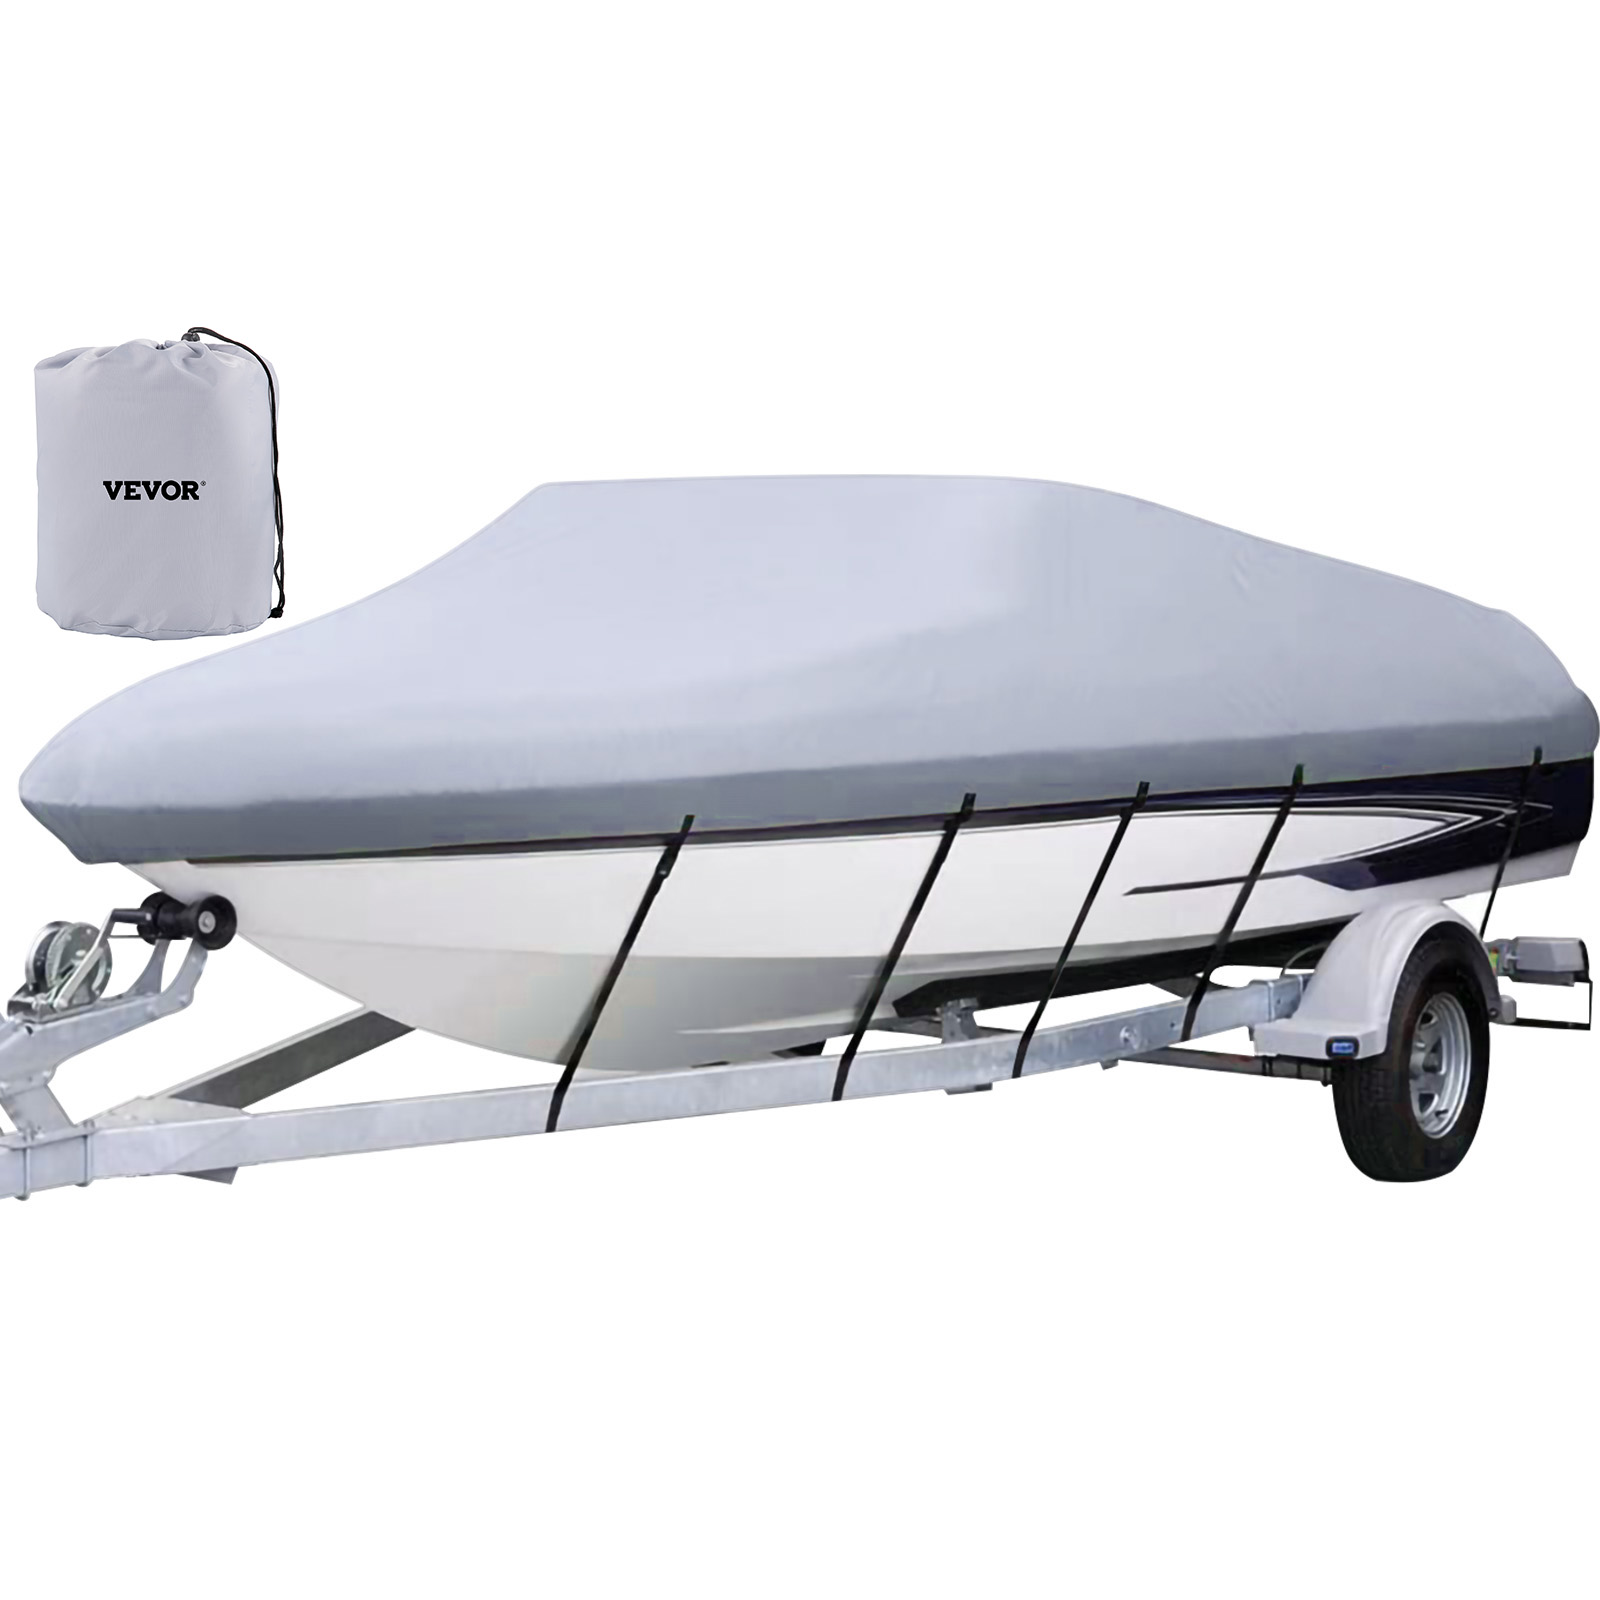 boat cover,16-18.5ft,600D